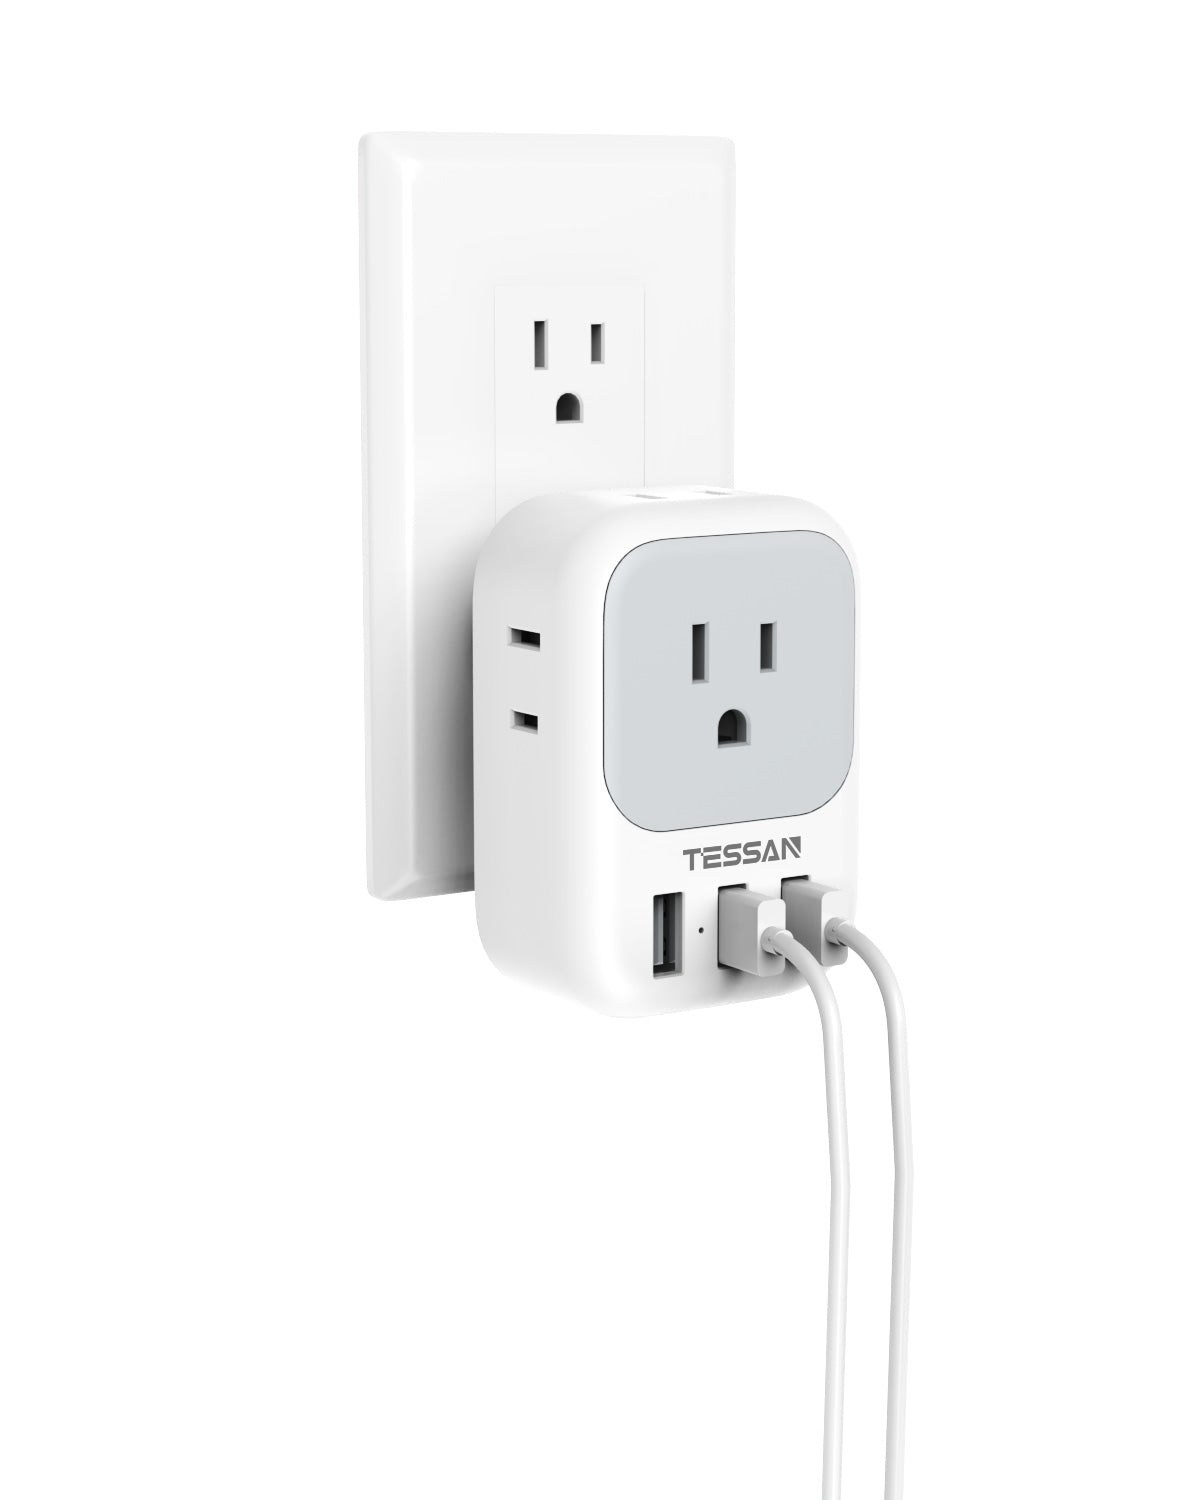 Home Multi Plug Outlet Extender With 4 Outlet Box Splitter 3 USB Wall Charger